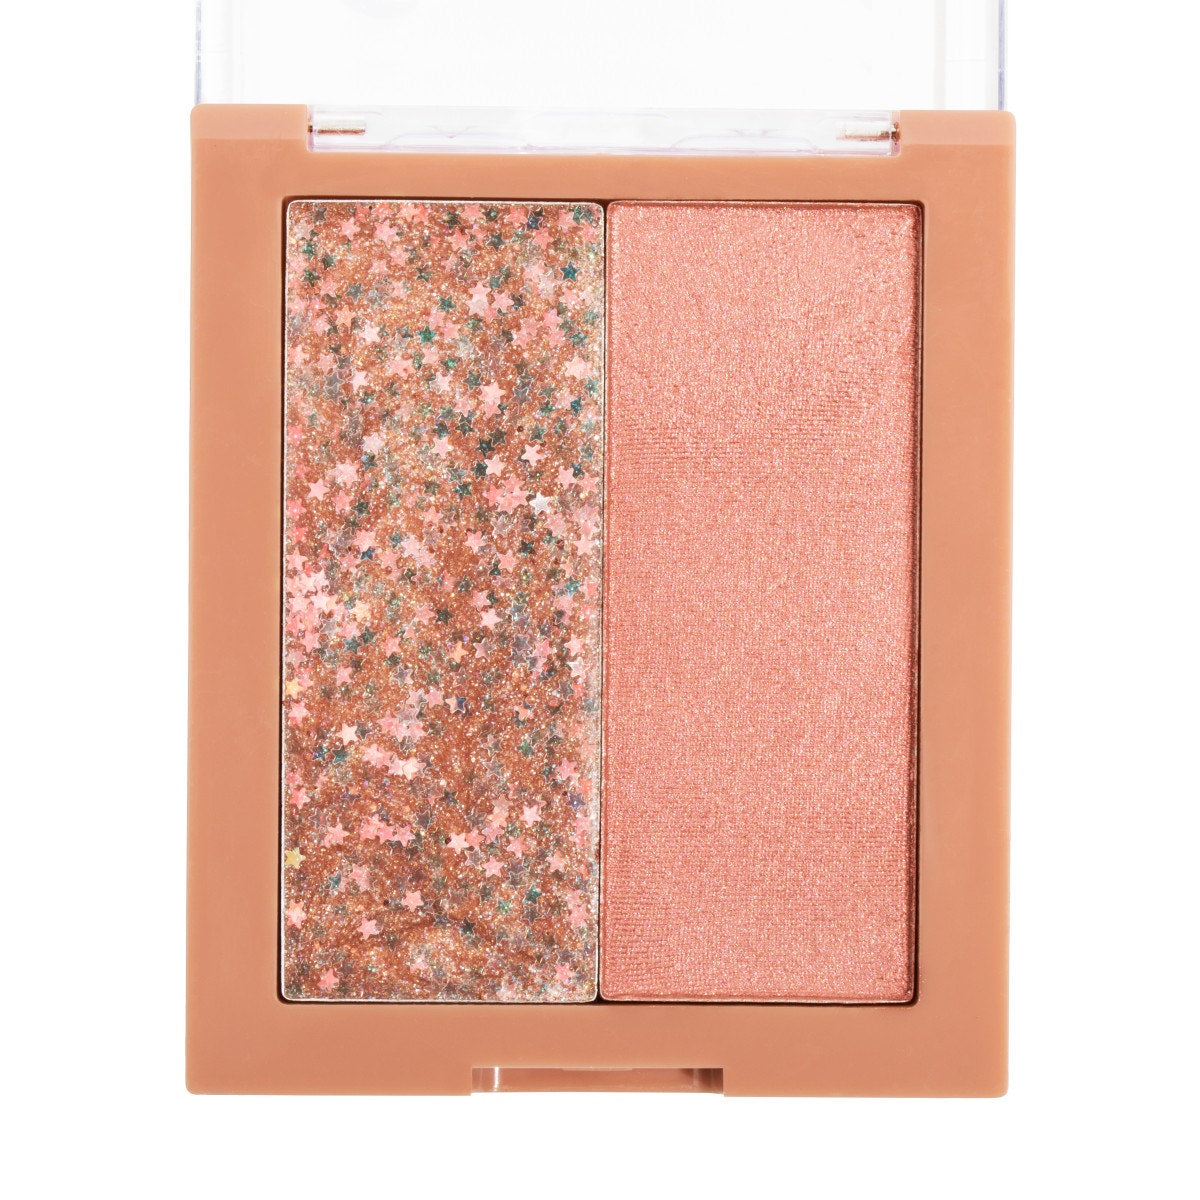 Star Lux Glitter Highlighter Duo - Now Or Nova